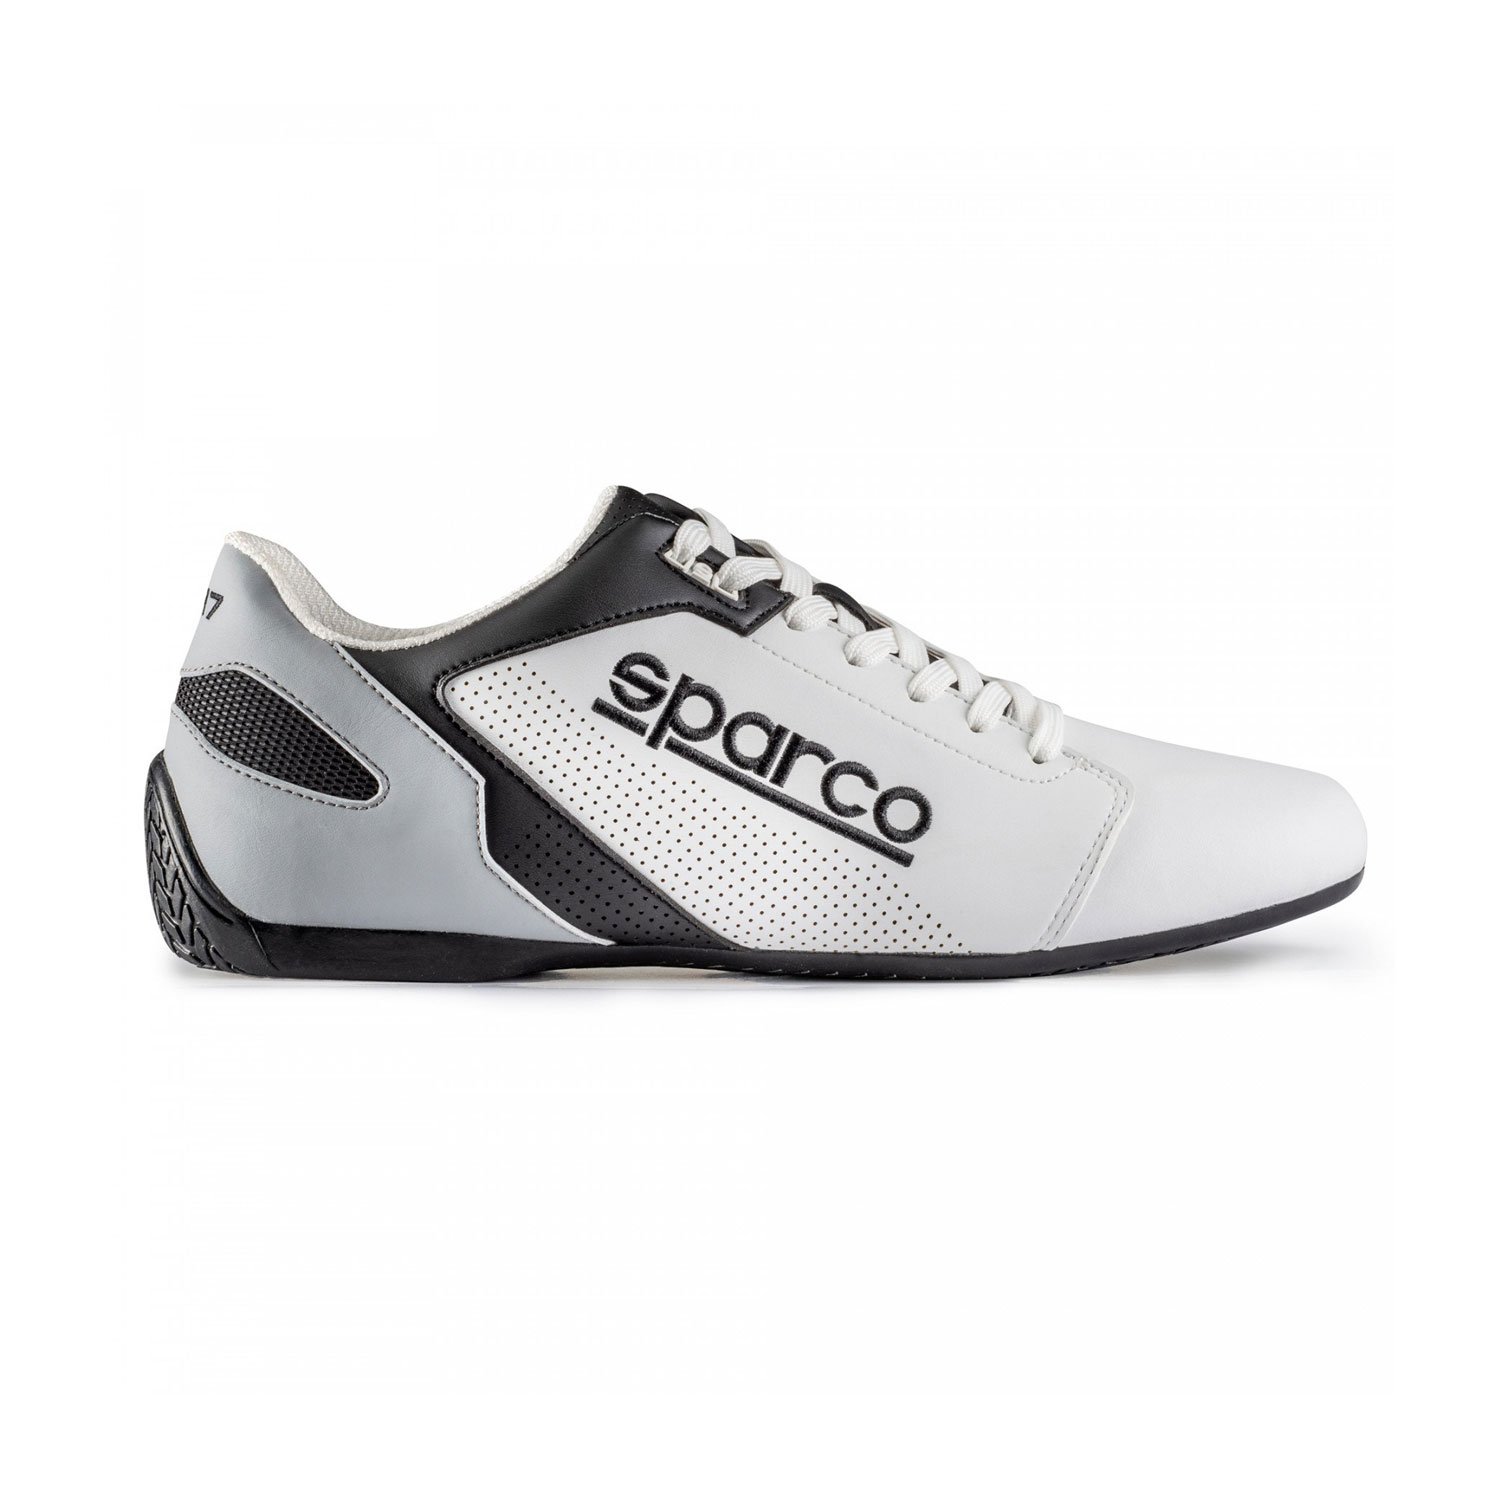 Sparco Italy SL-17 Casual Shoes - White 